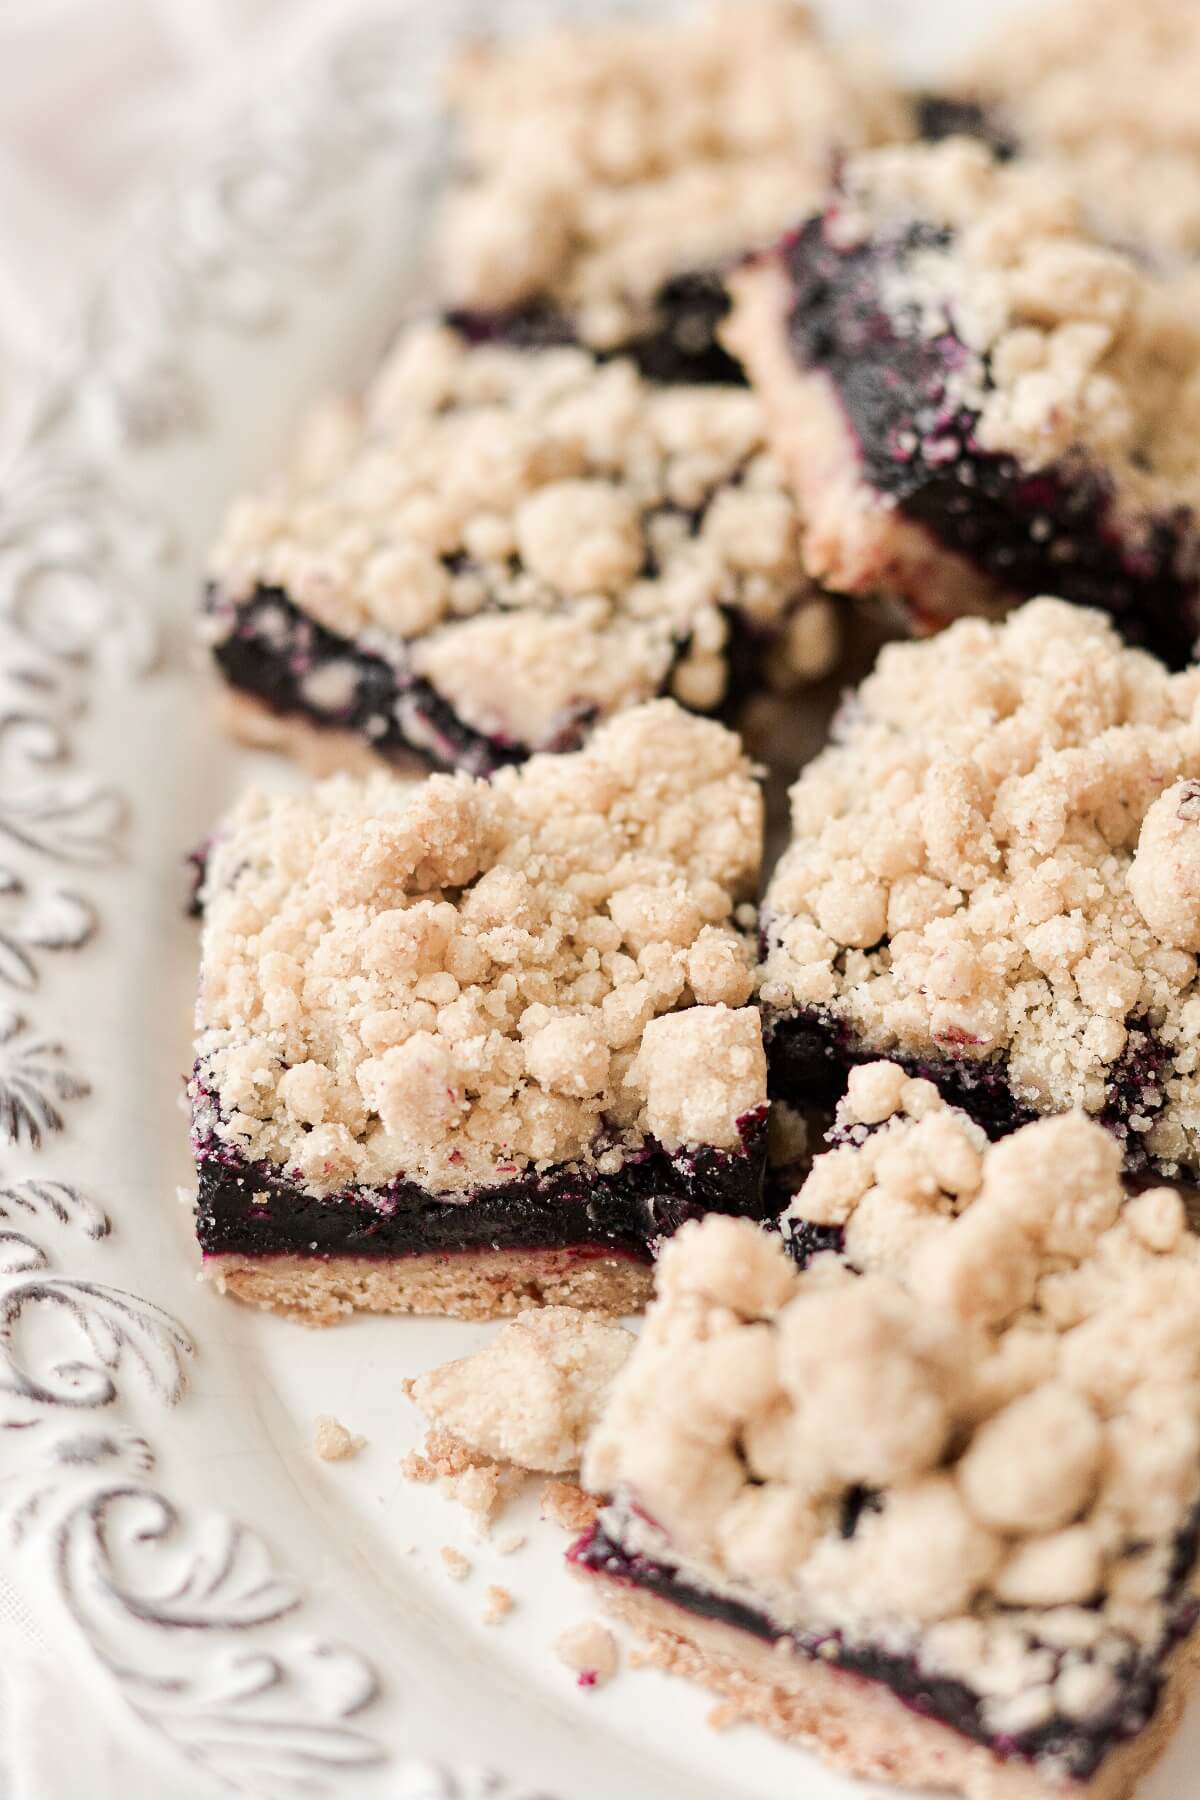 Blueberry crumb bars arranged on a plate.